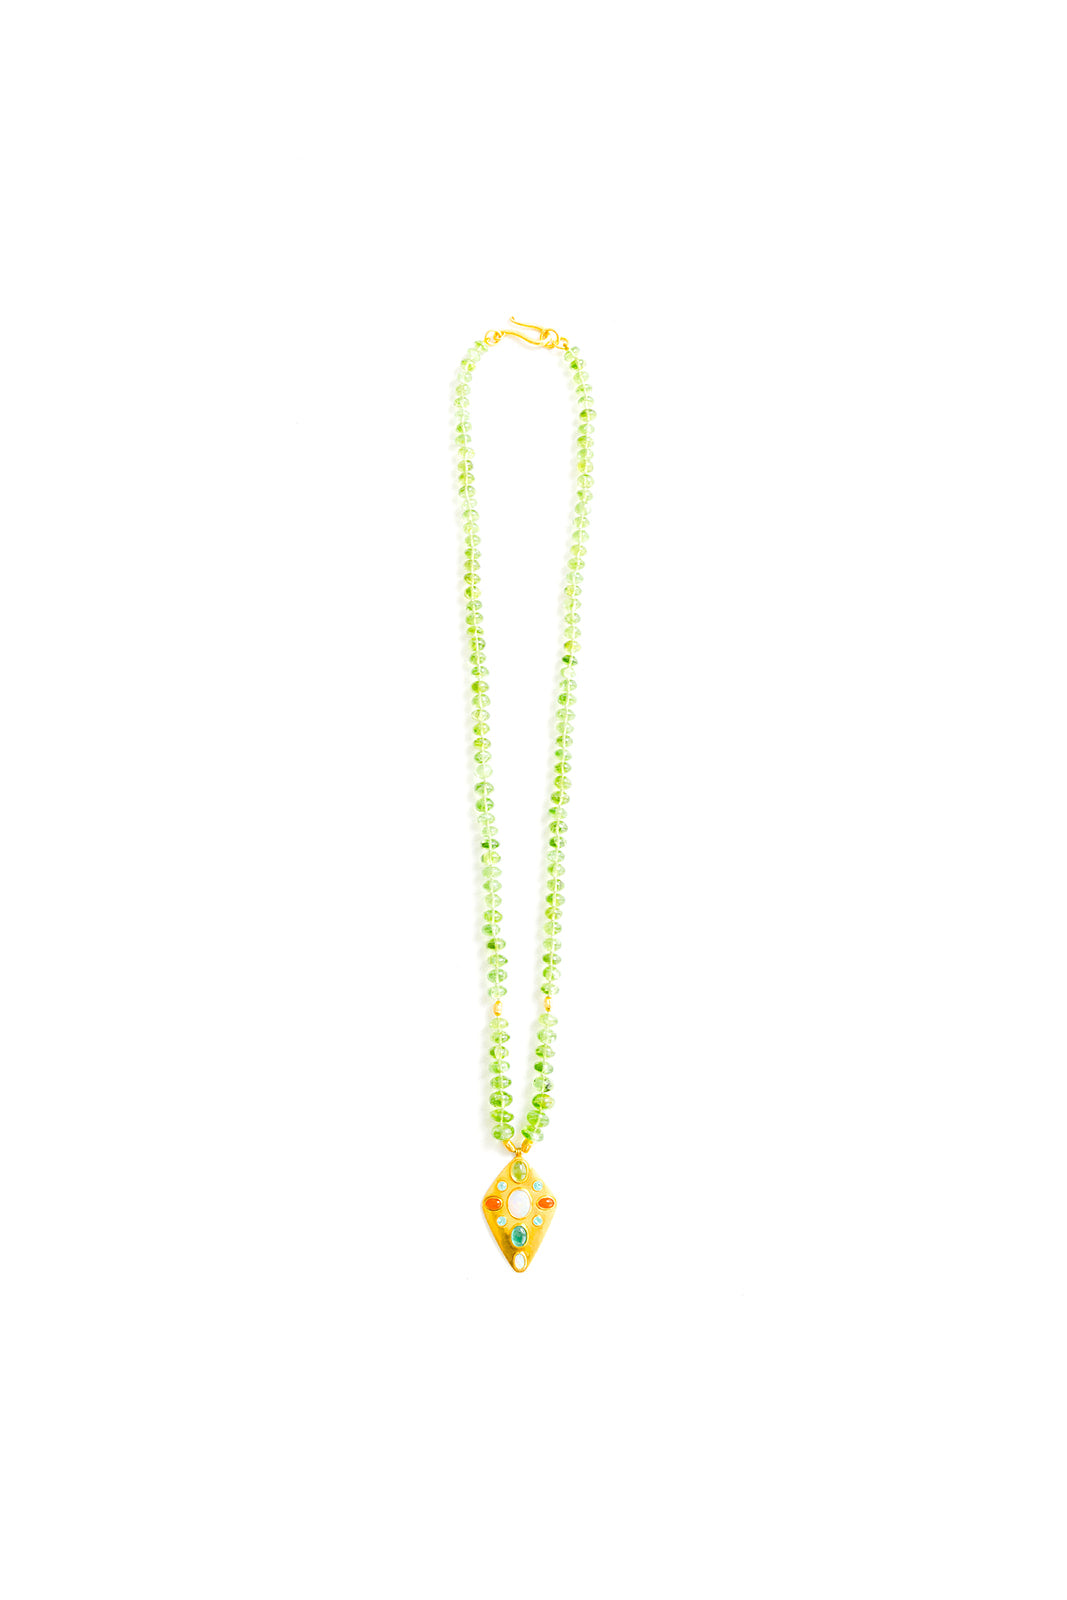 24" Peridot Necklace with Rice Nuggets and 22K Yellow Gold Kite Pendant